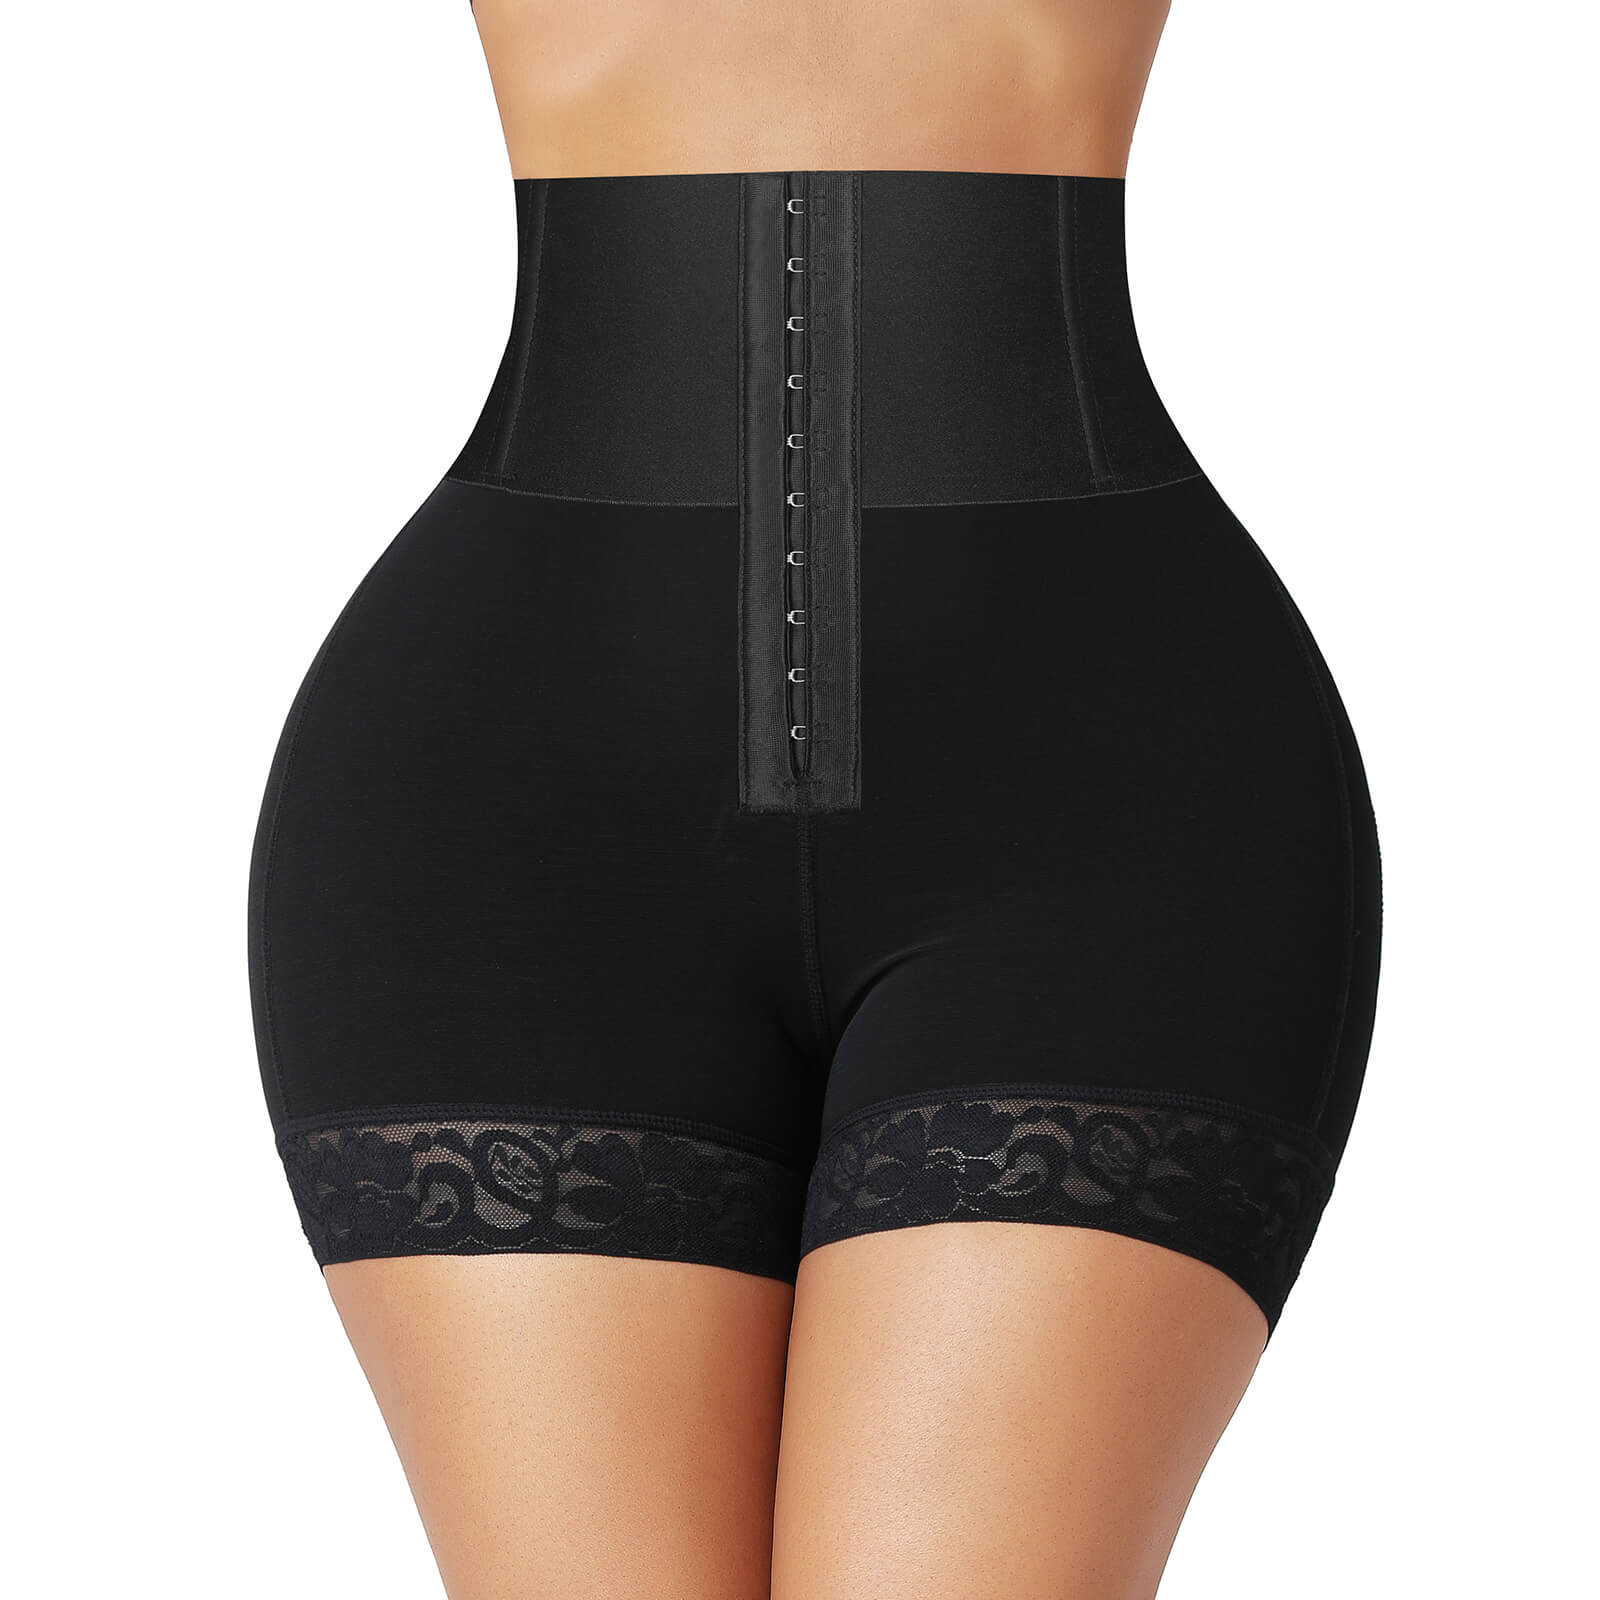 Bulk-buy Wholesale Affordable and Breathable Body Shapewear Tummy Control  Shapers Butt Lifter Panty Shaper High Waist Shapewear price comparison